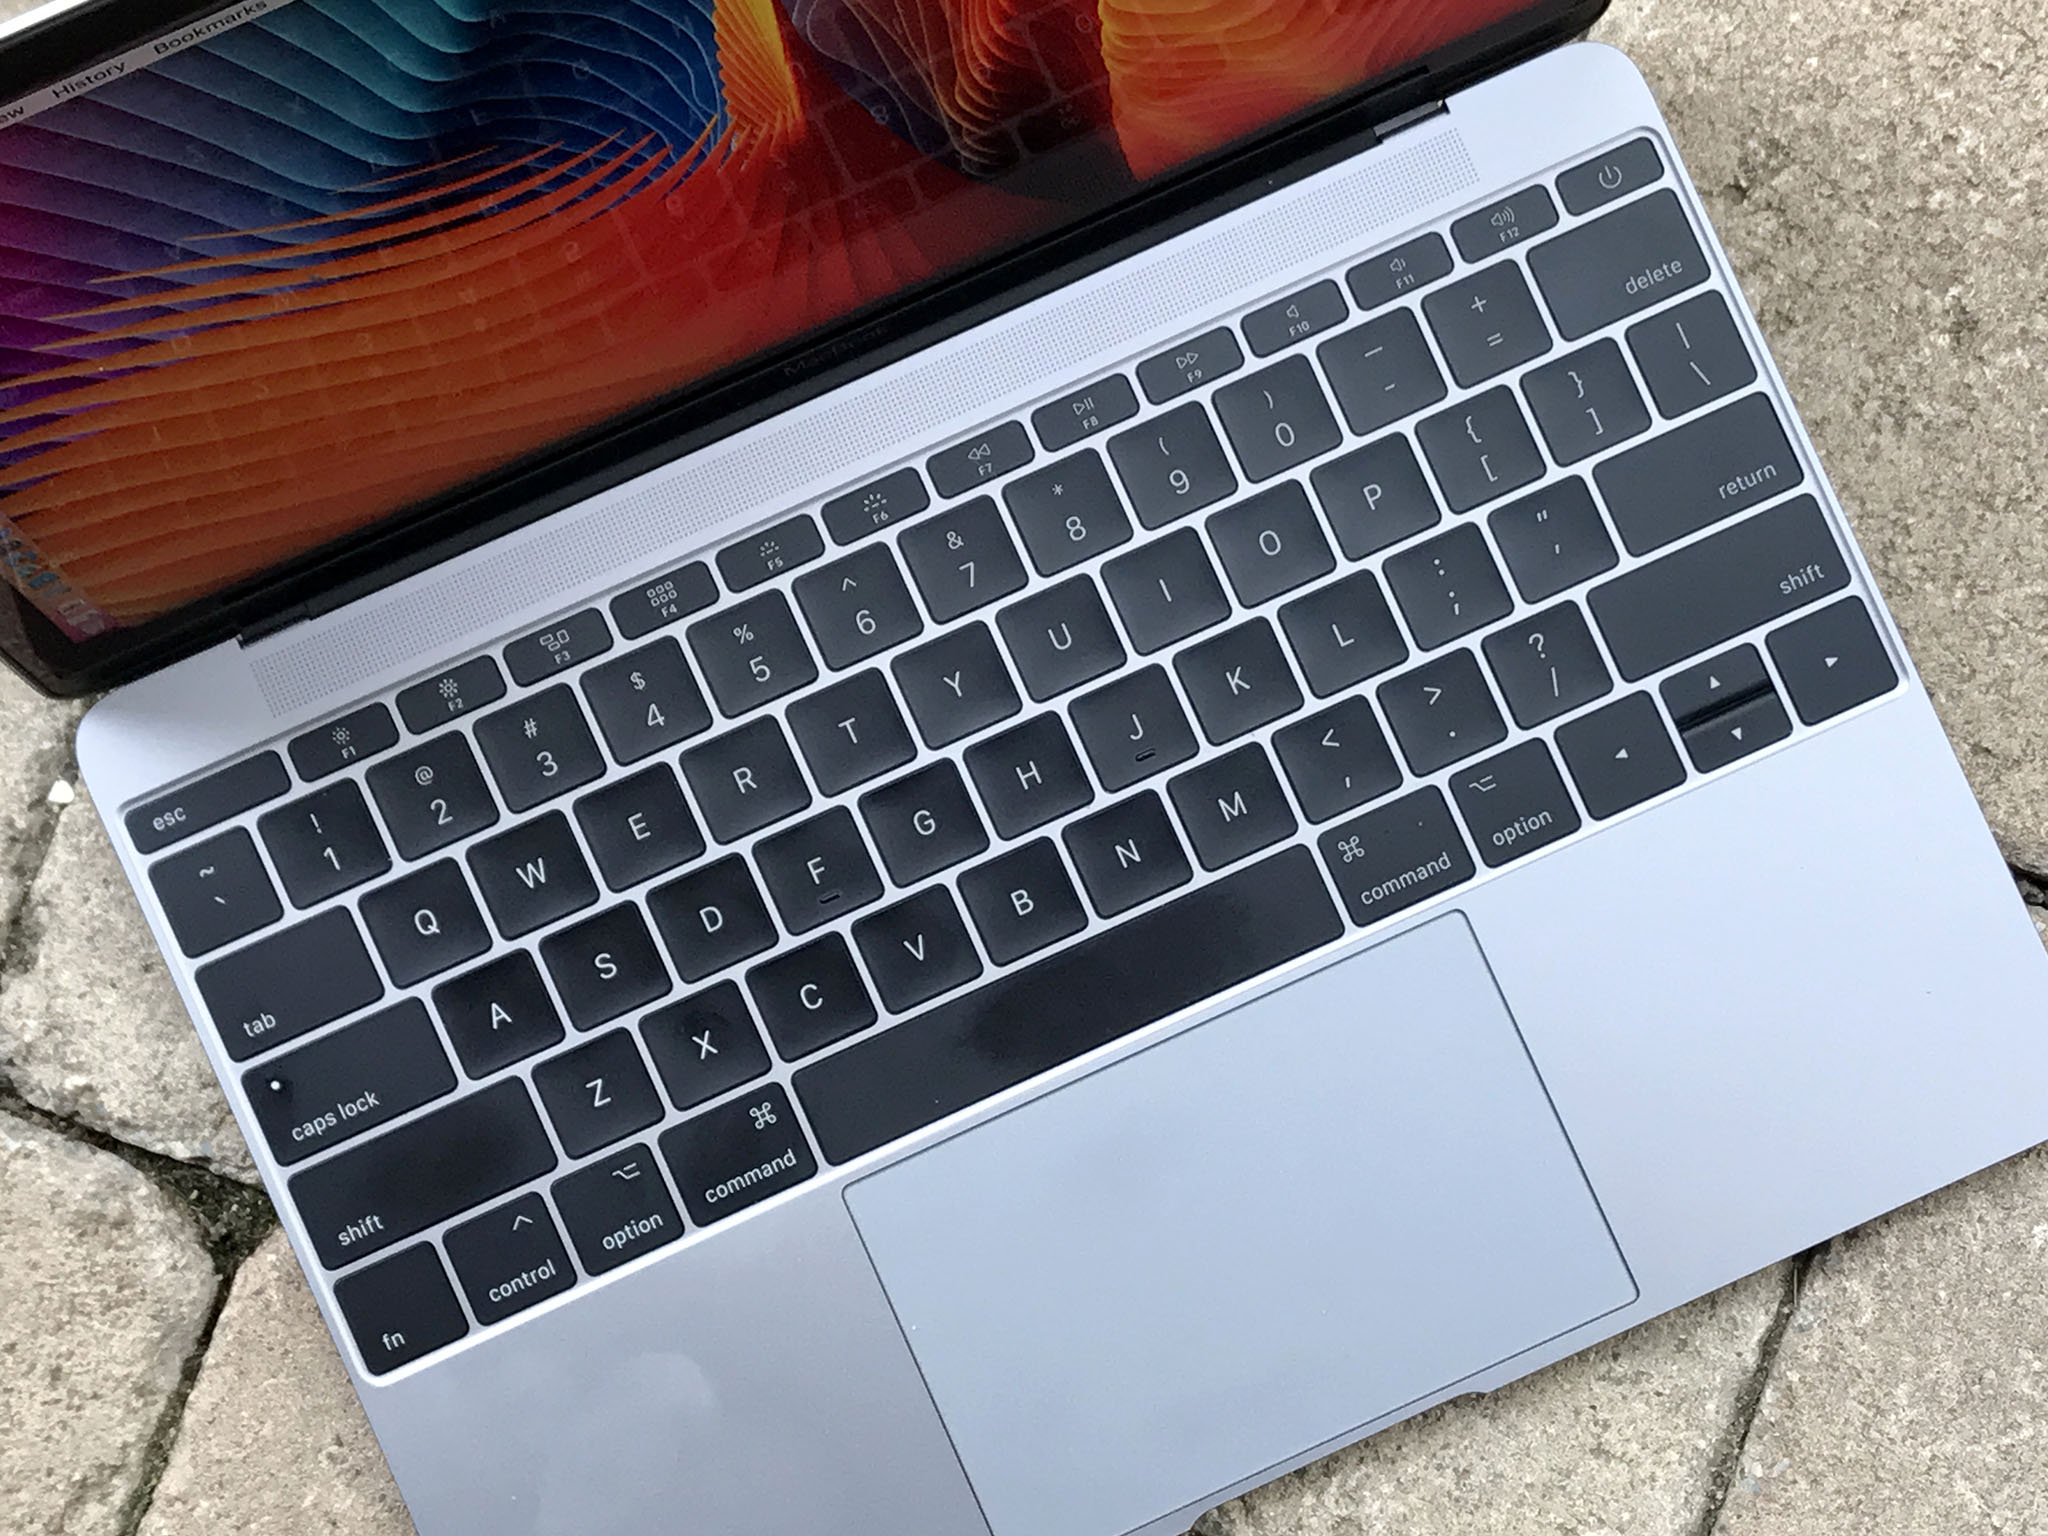 A Windows PC user's to the Mac keyboard | iMore